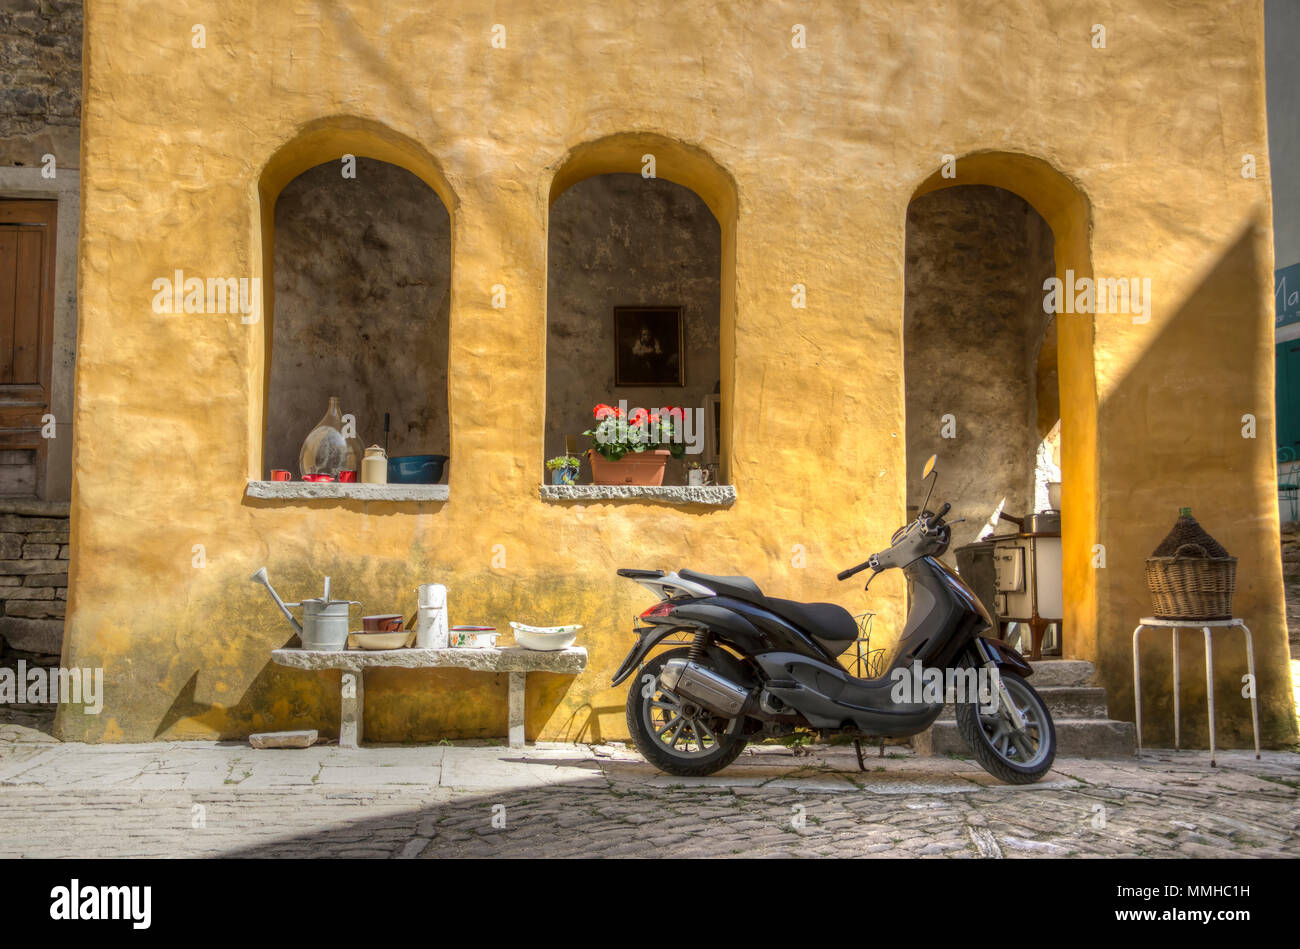 Central Istria, Croatia, April 2018 - Scooter parked in front of an old yellow house at the corner of two streets in the ancient town of Oprtalj Stock Photo